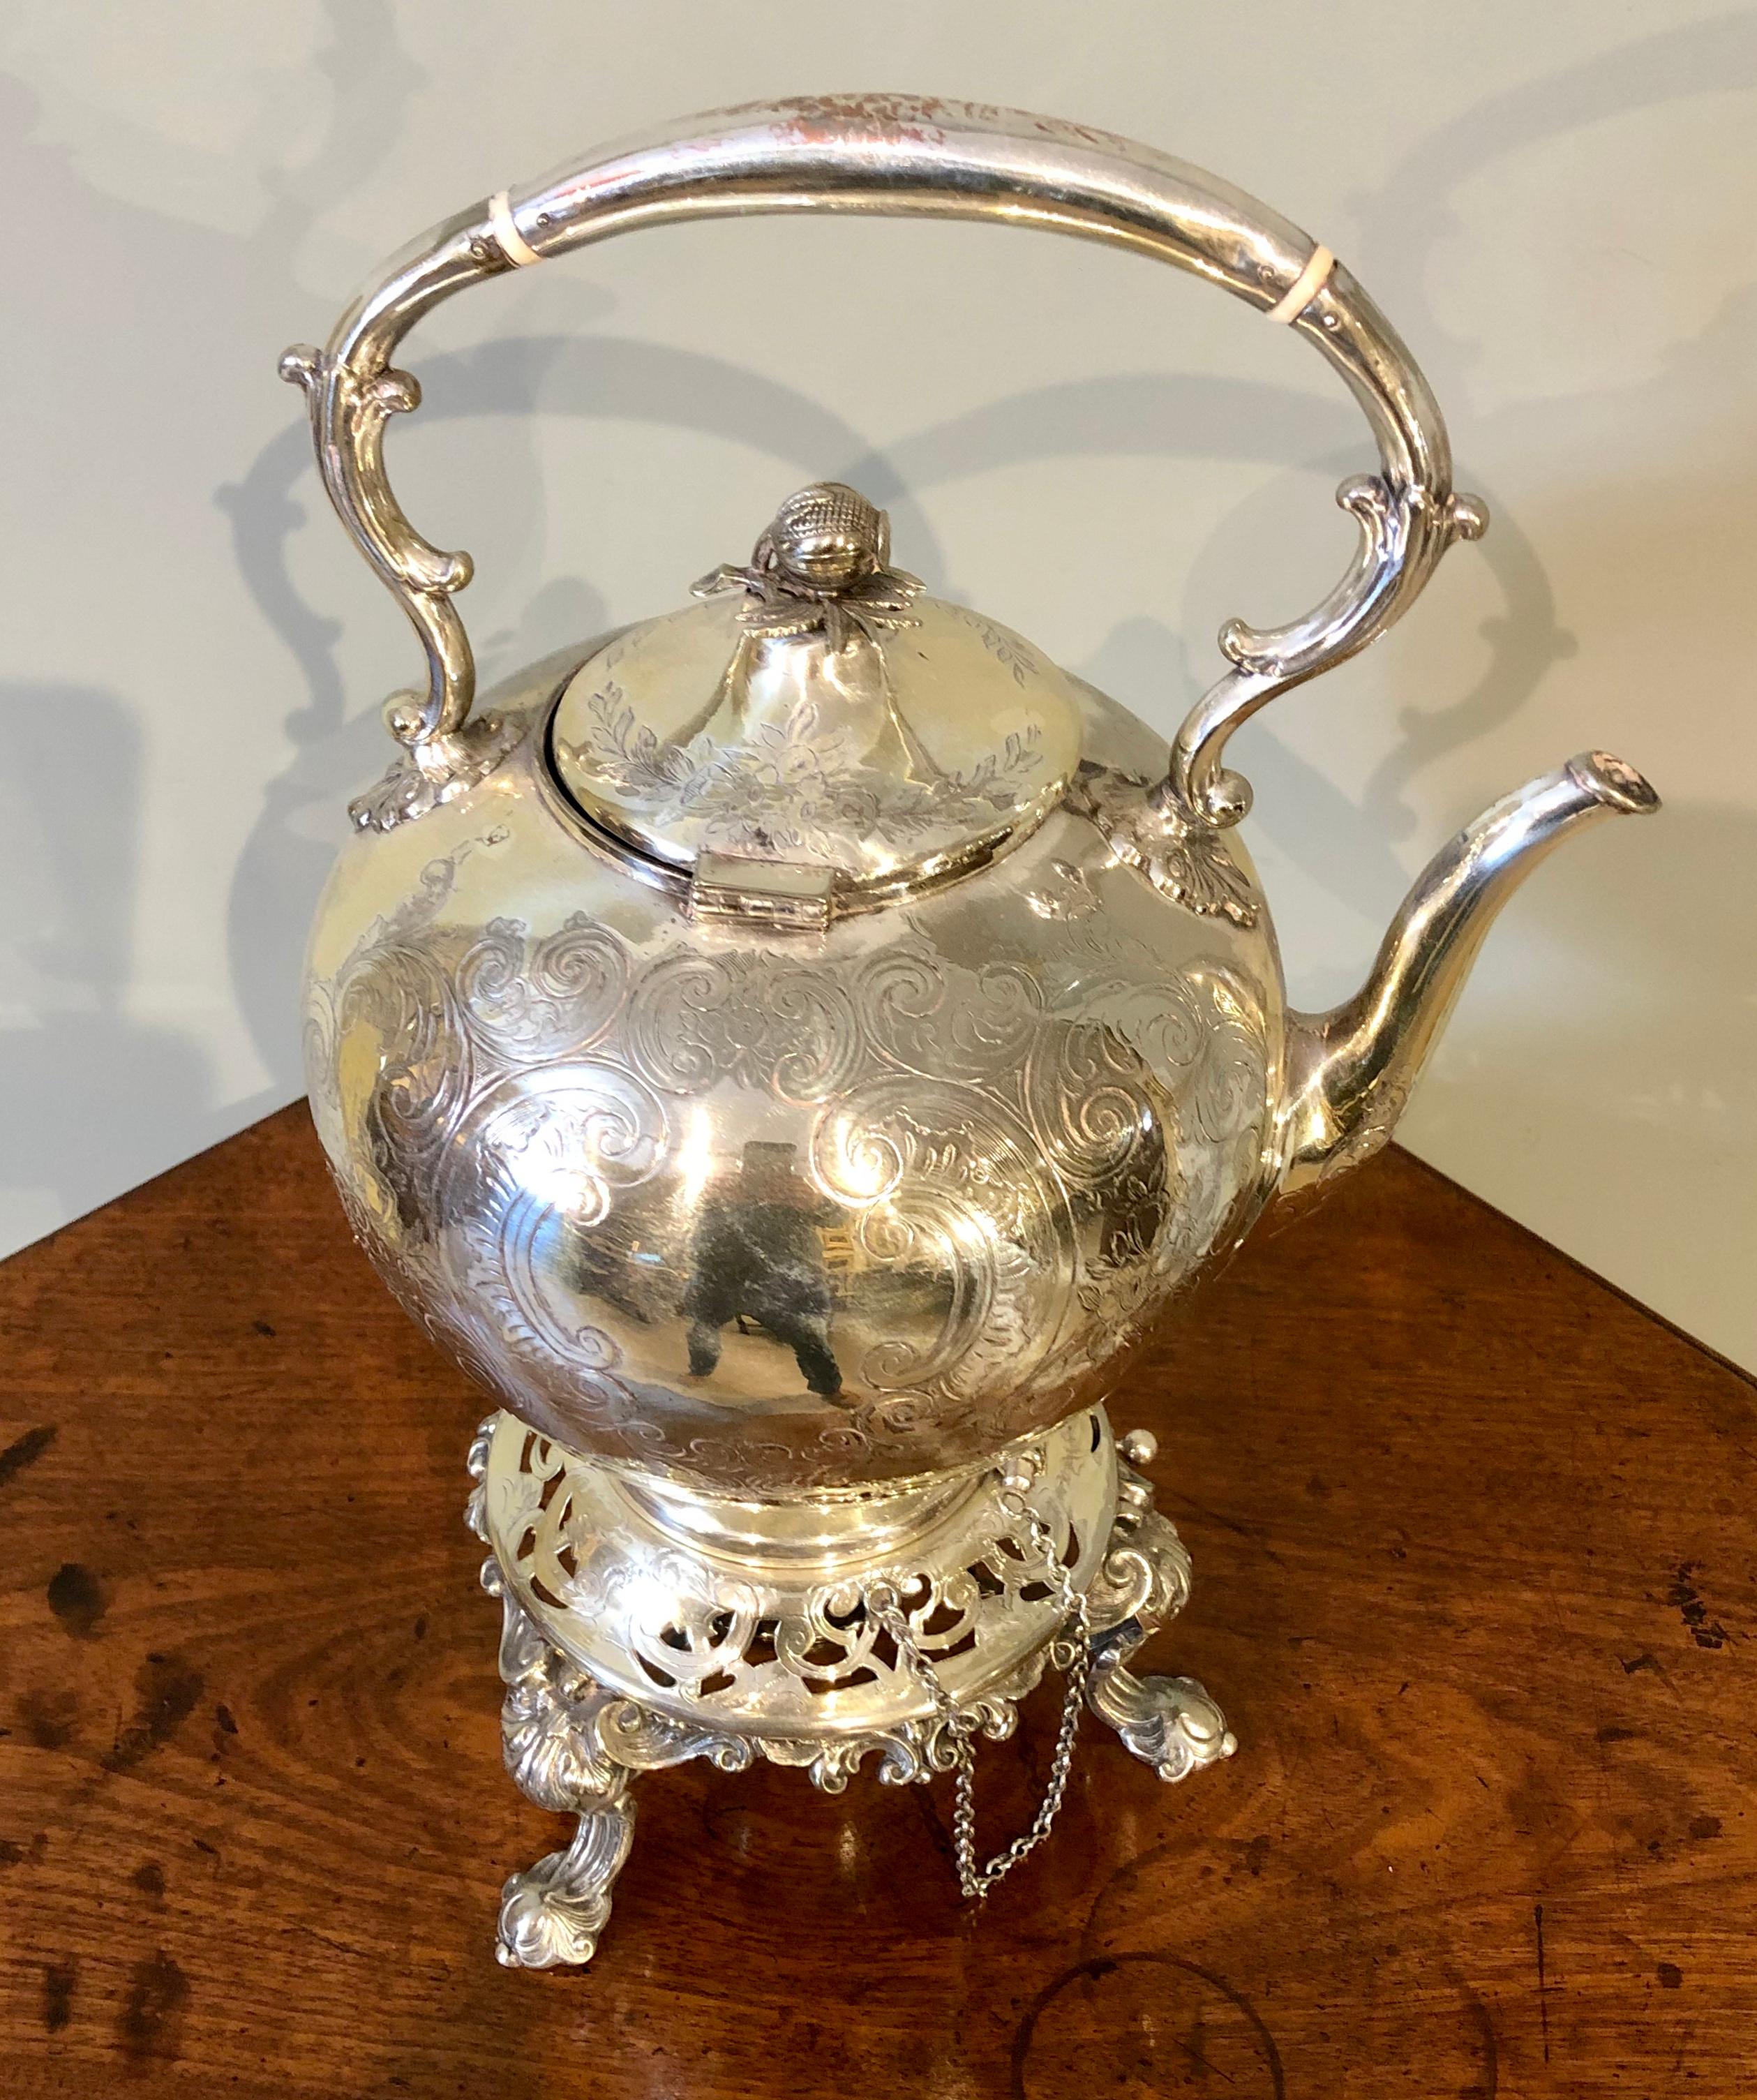 A wonderfully decorative 19th century Regency style silver plate tilting teapot with burner. Floral scroll engravings decorate the teapot surrounding the uninscribed cartouches.